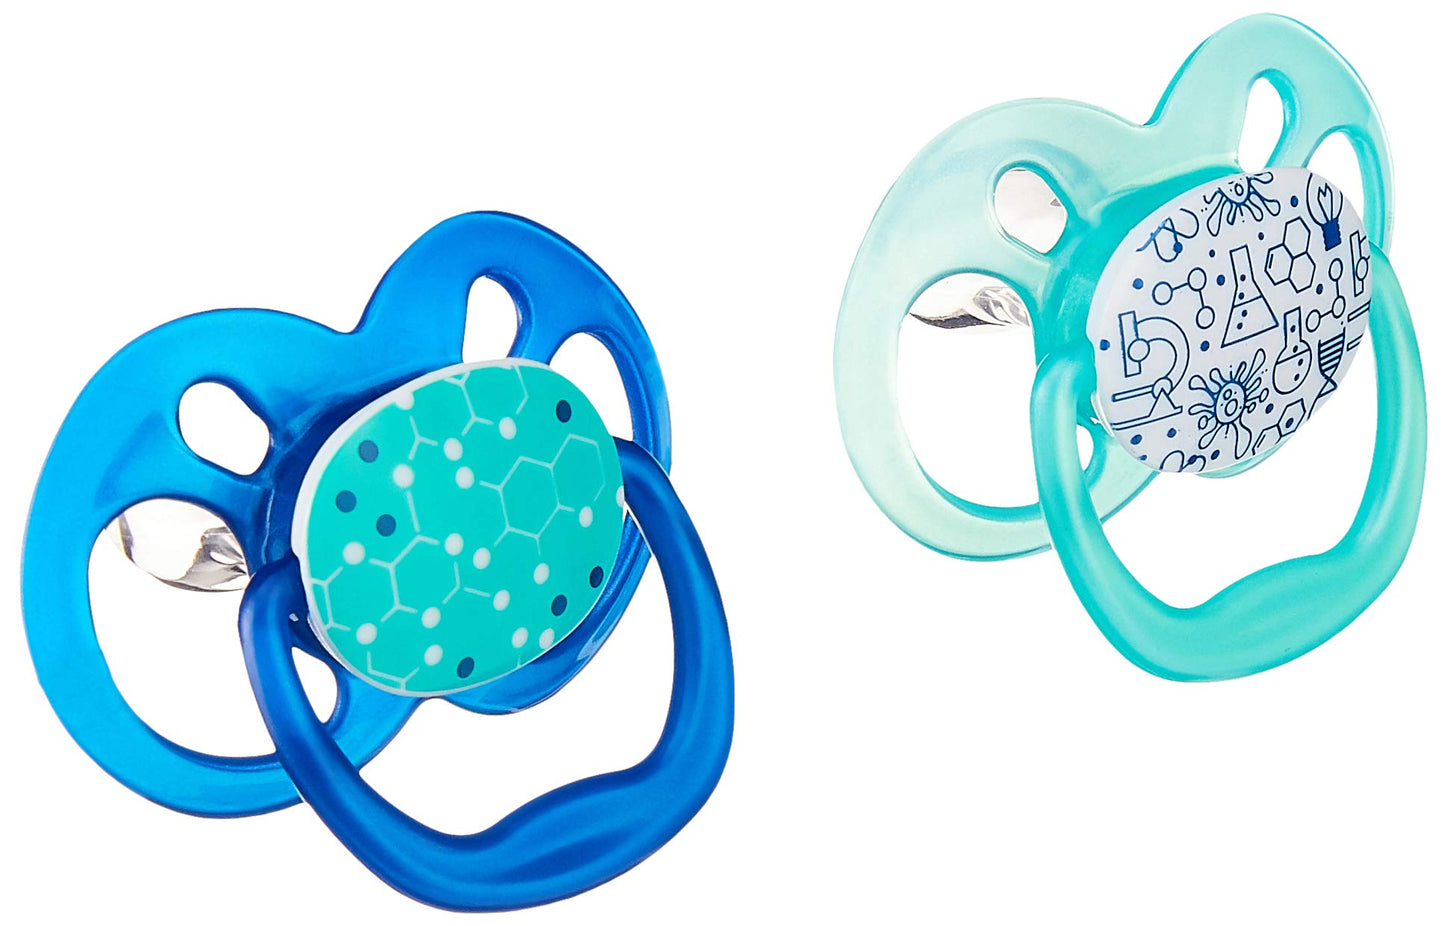 DR BROWNS Pacifier - Piece of 2 , Stage Blue Chemistry,